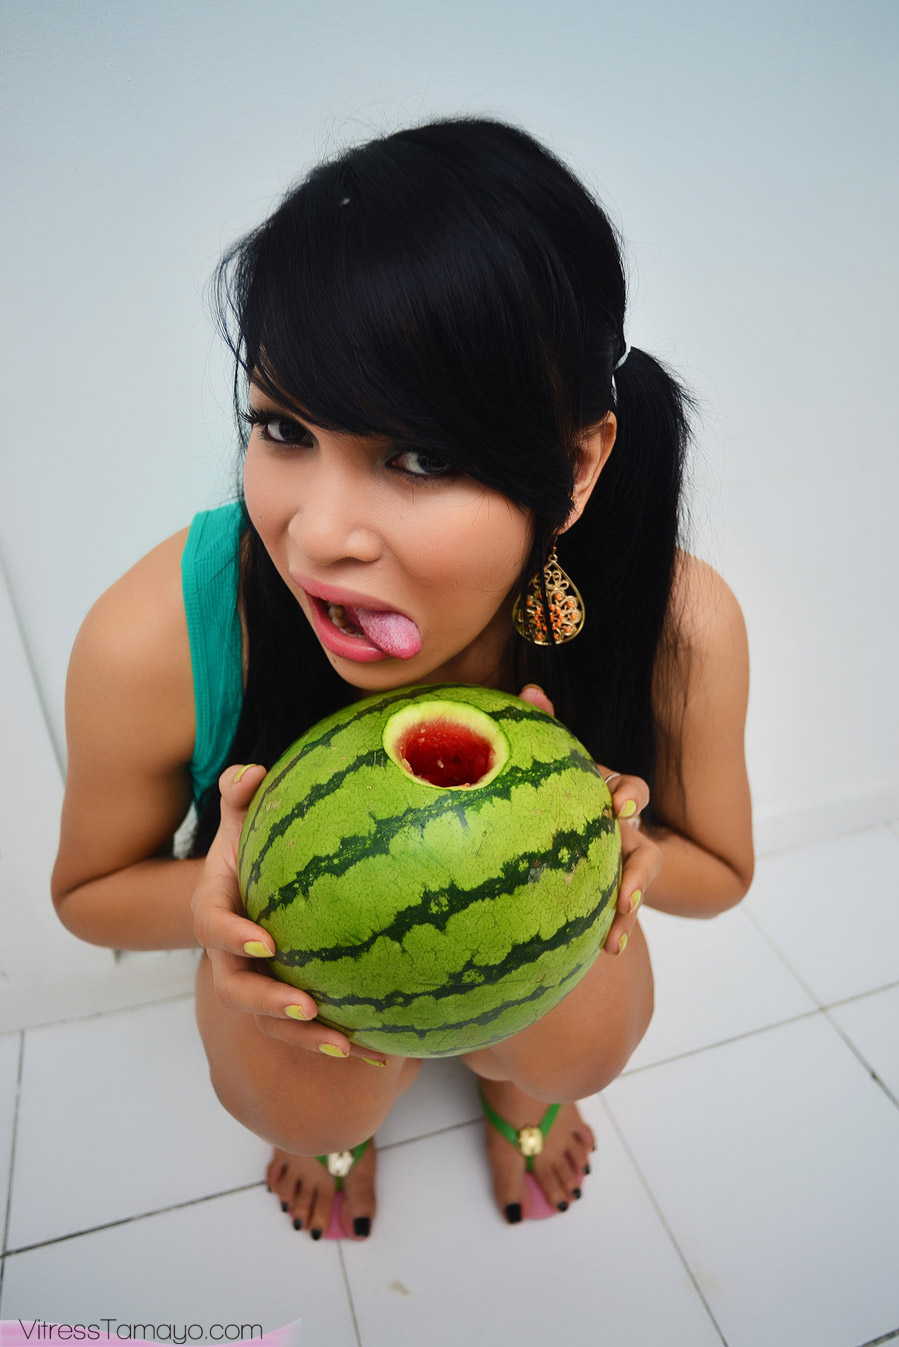 Shemale Sex With Food - Petite Asian shemale with Big Tits fucking a watermelon - ShemaleTubeVideos